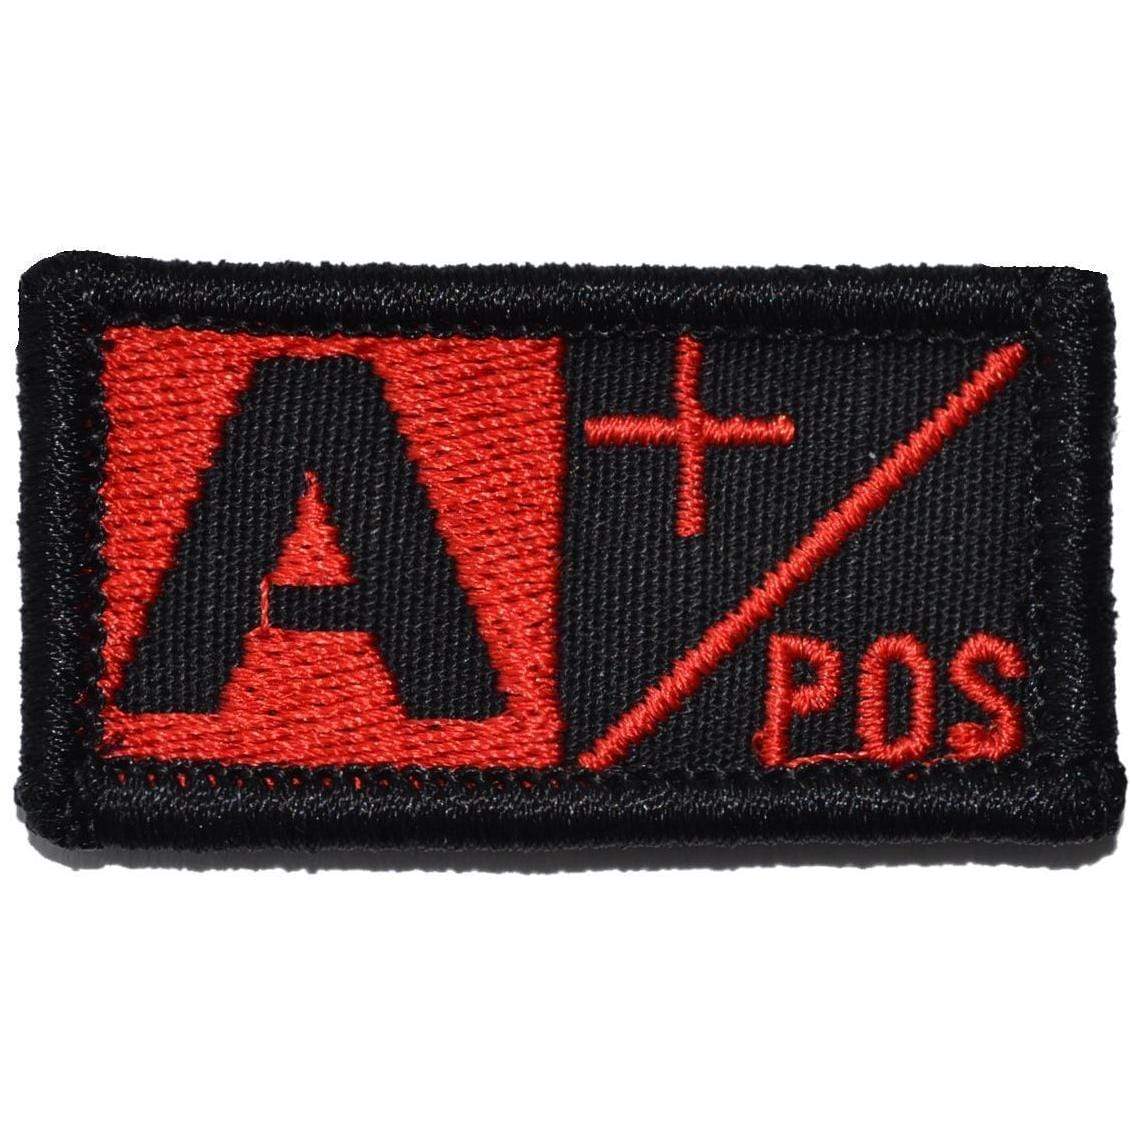 Tactical Gear Junkie Patches Black w/ Red Blood Type - 1x2 Patch